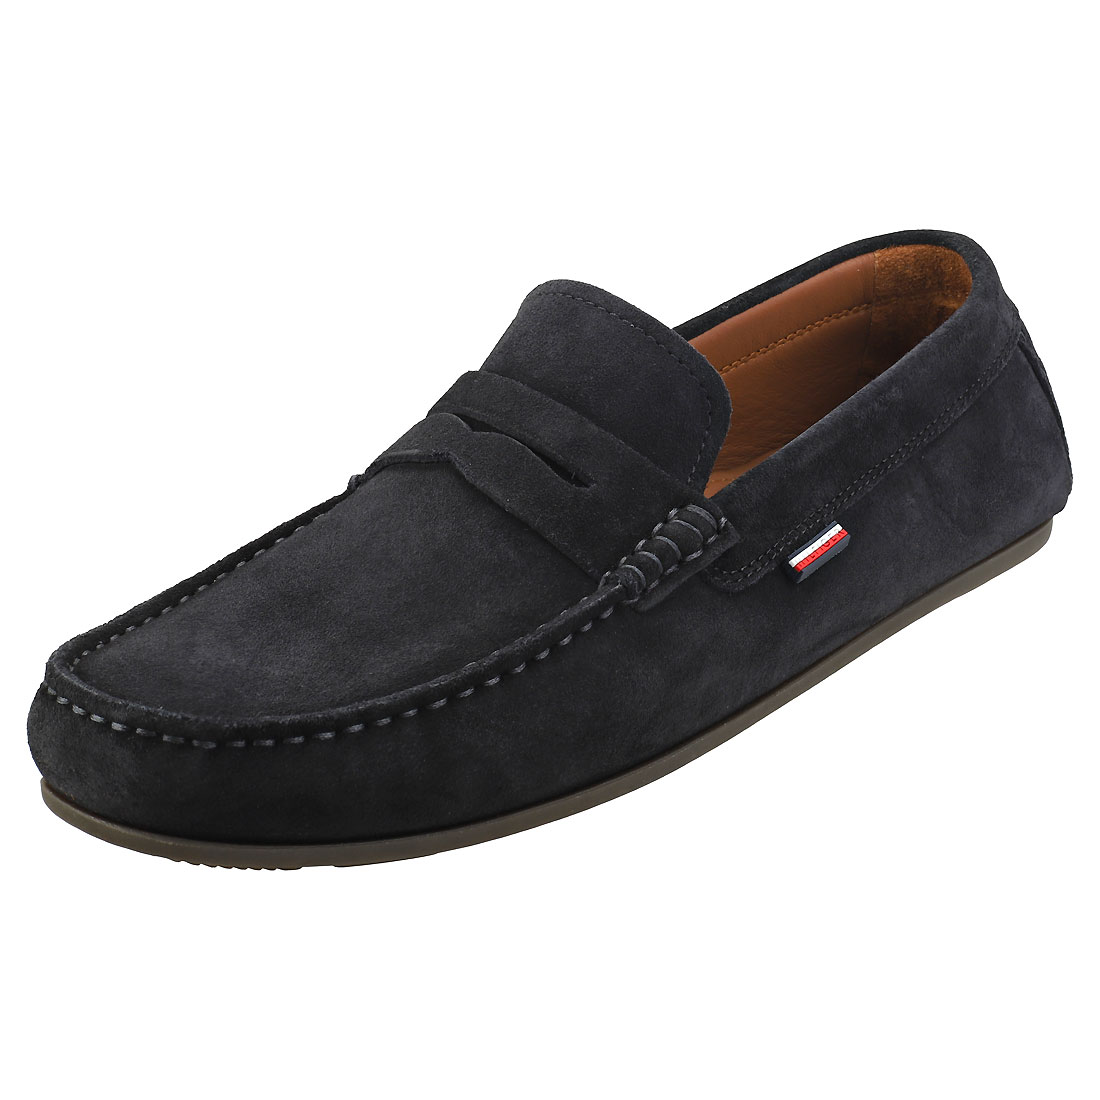 tommy hilfiger suede shoes